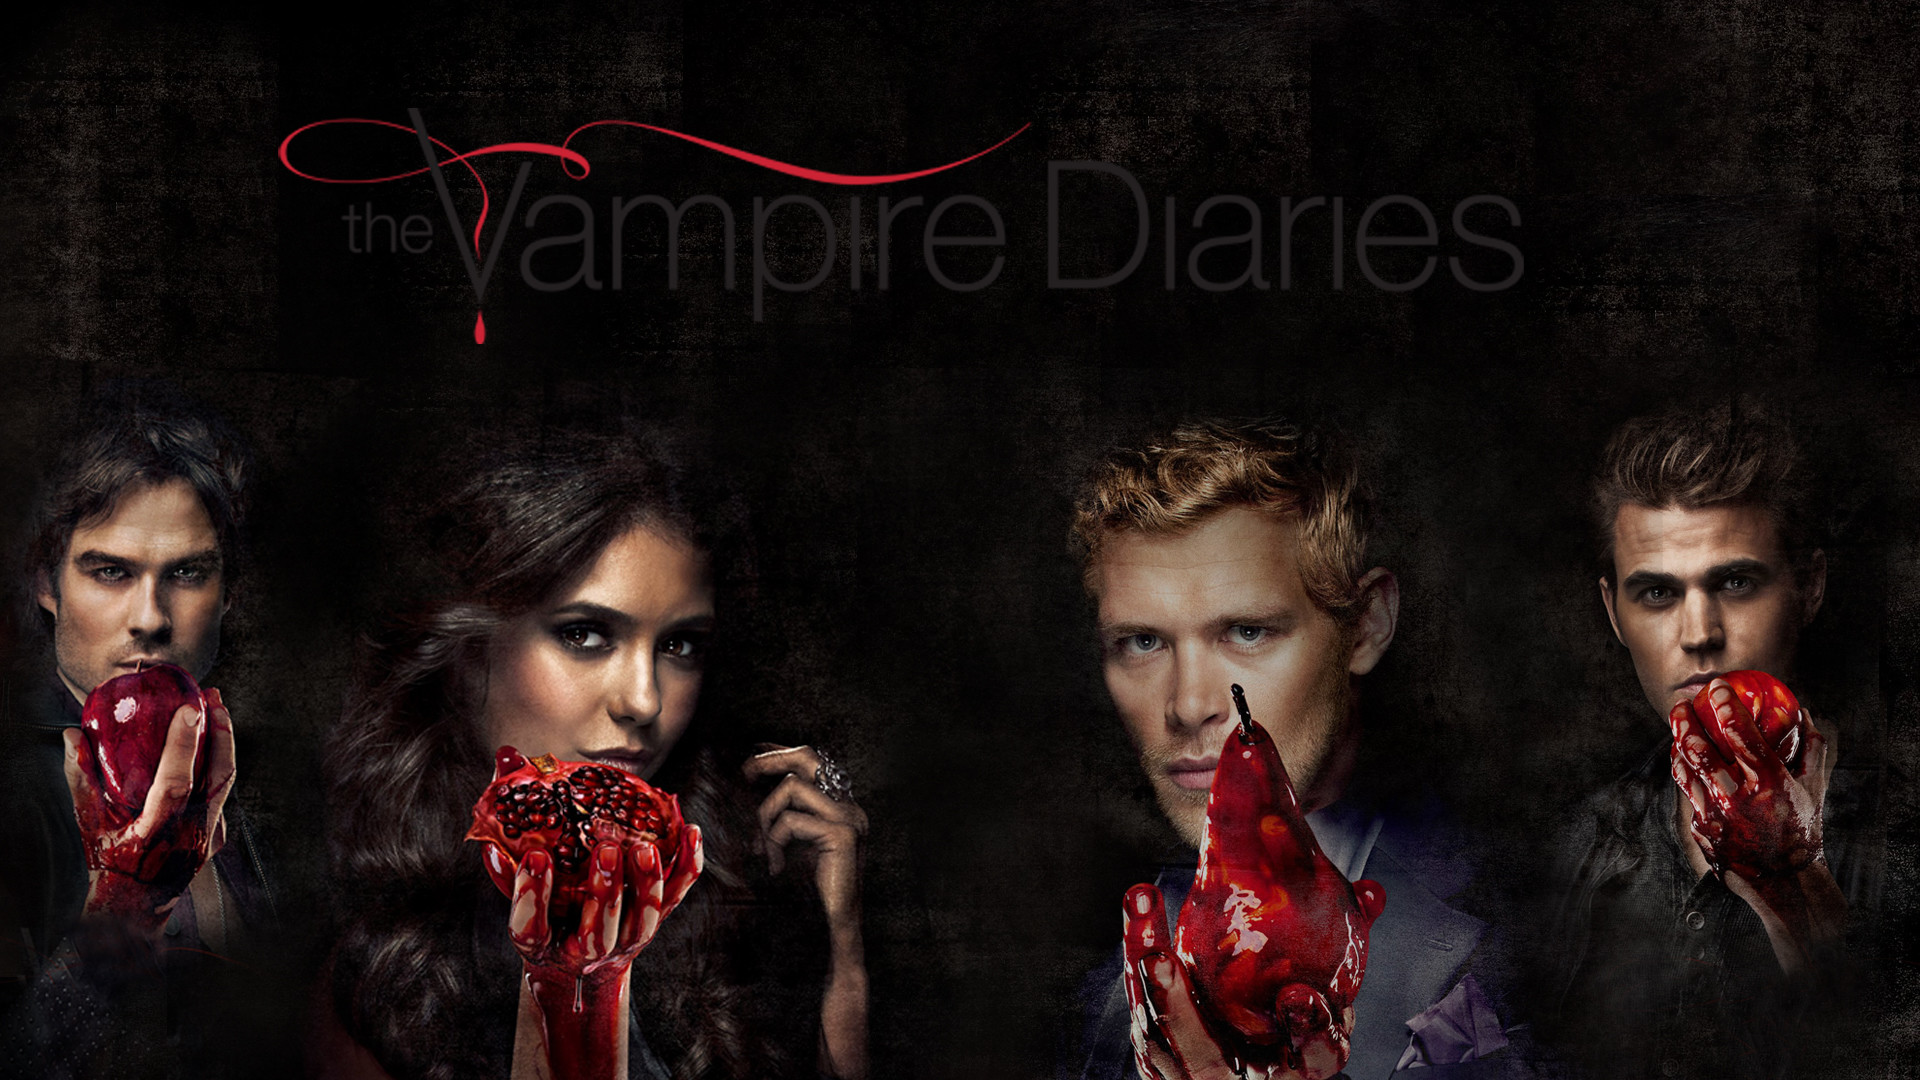 1920x1080 Wallpaper The Vampire Diaries 1 by Alexandreholz Wallpaper The Vampire  Diaries 1 by Alexandreholz